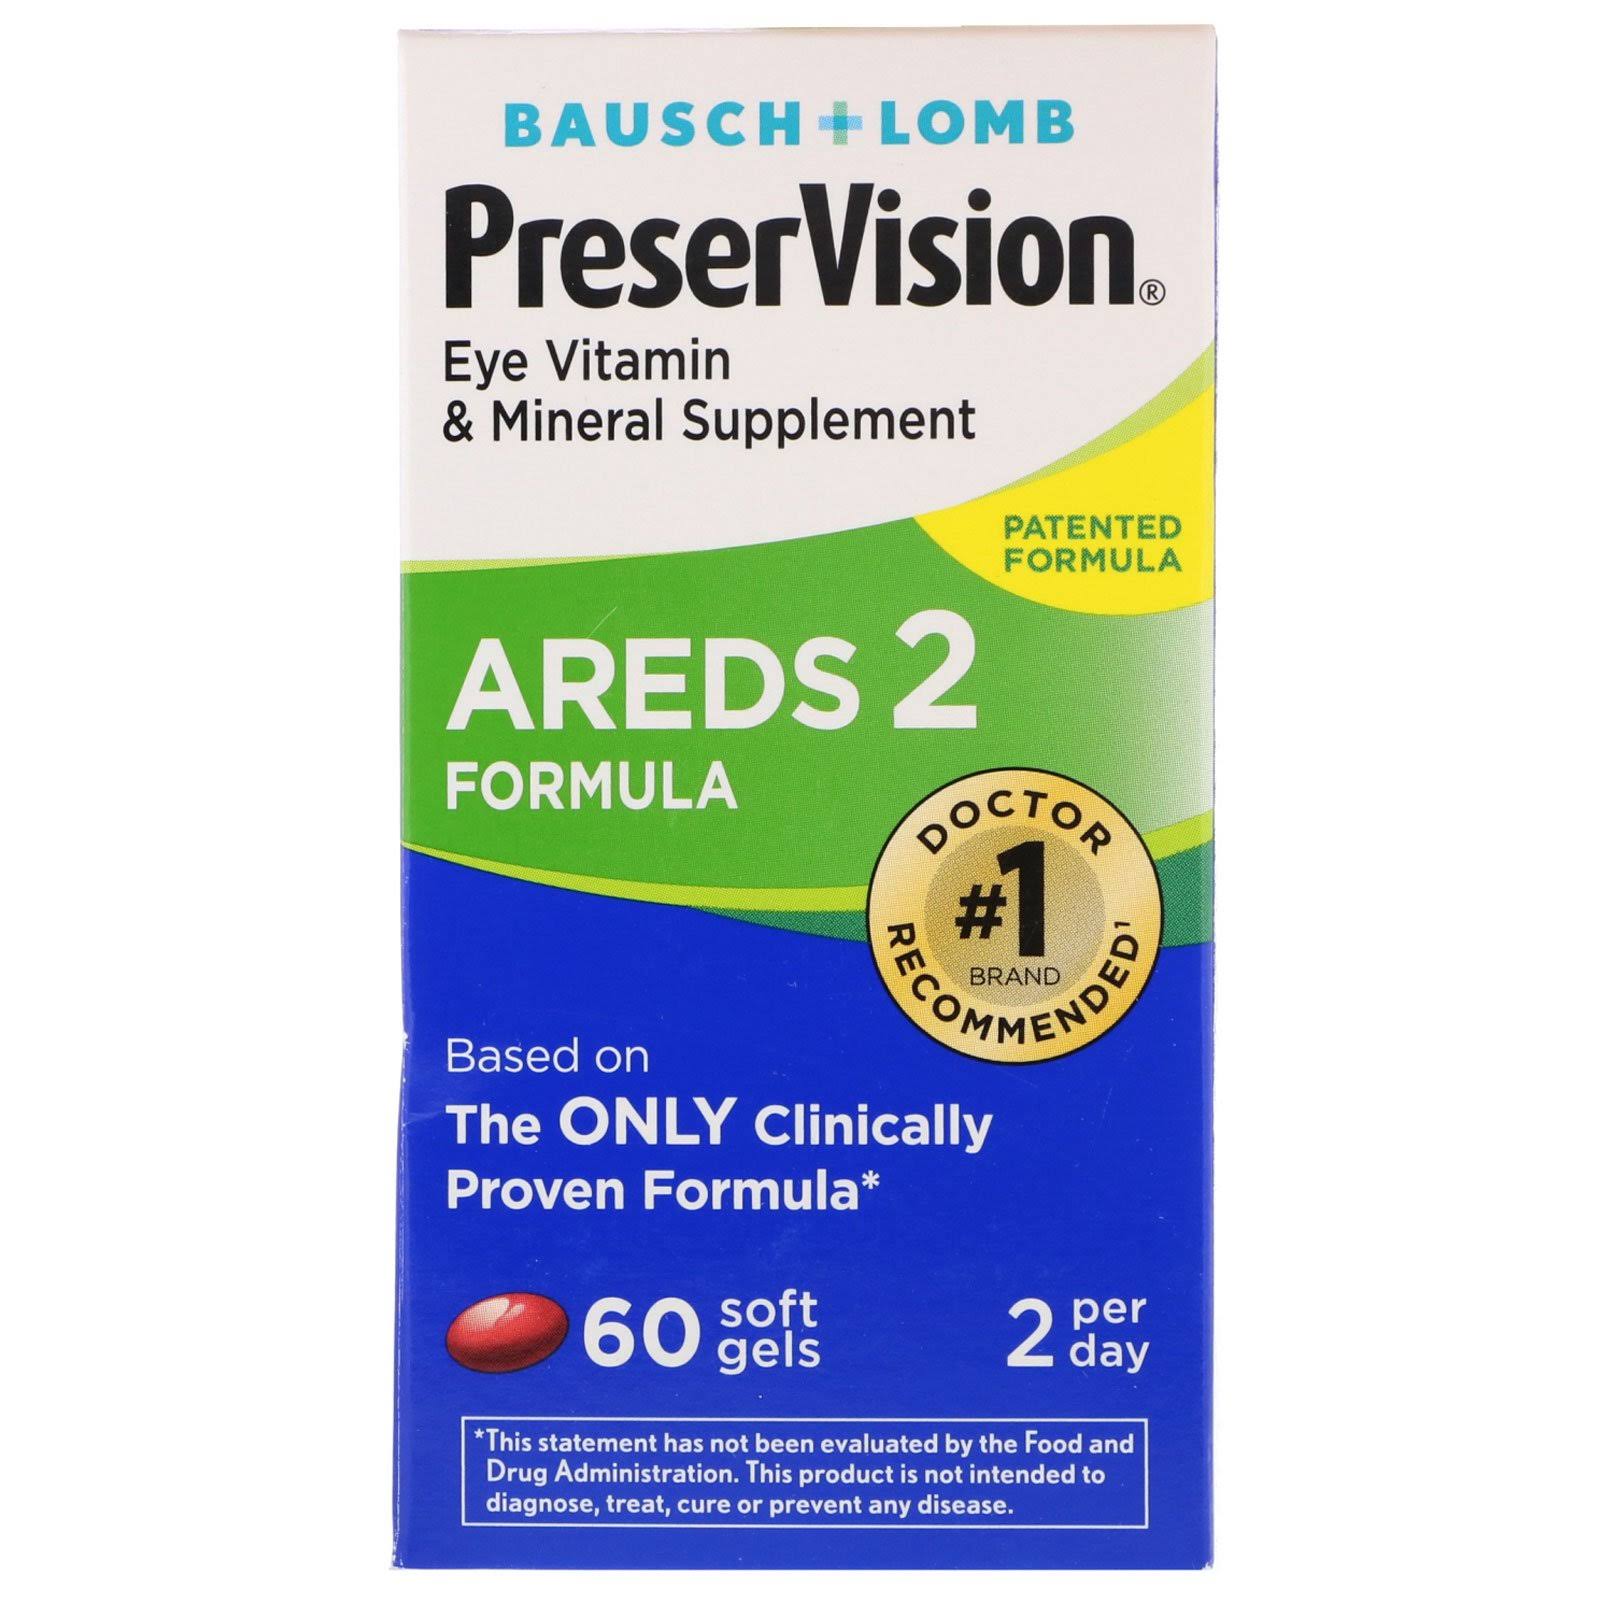 Bausch and Lomb PreserVision AREDS 2 Formula Eye Vitamin - 60ct